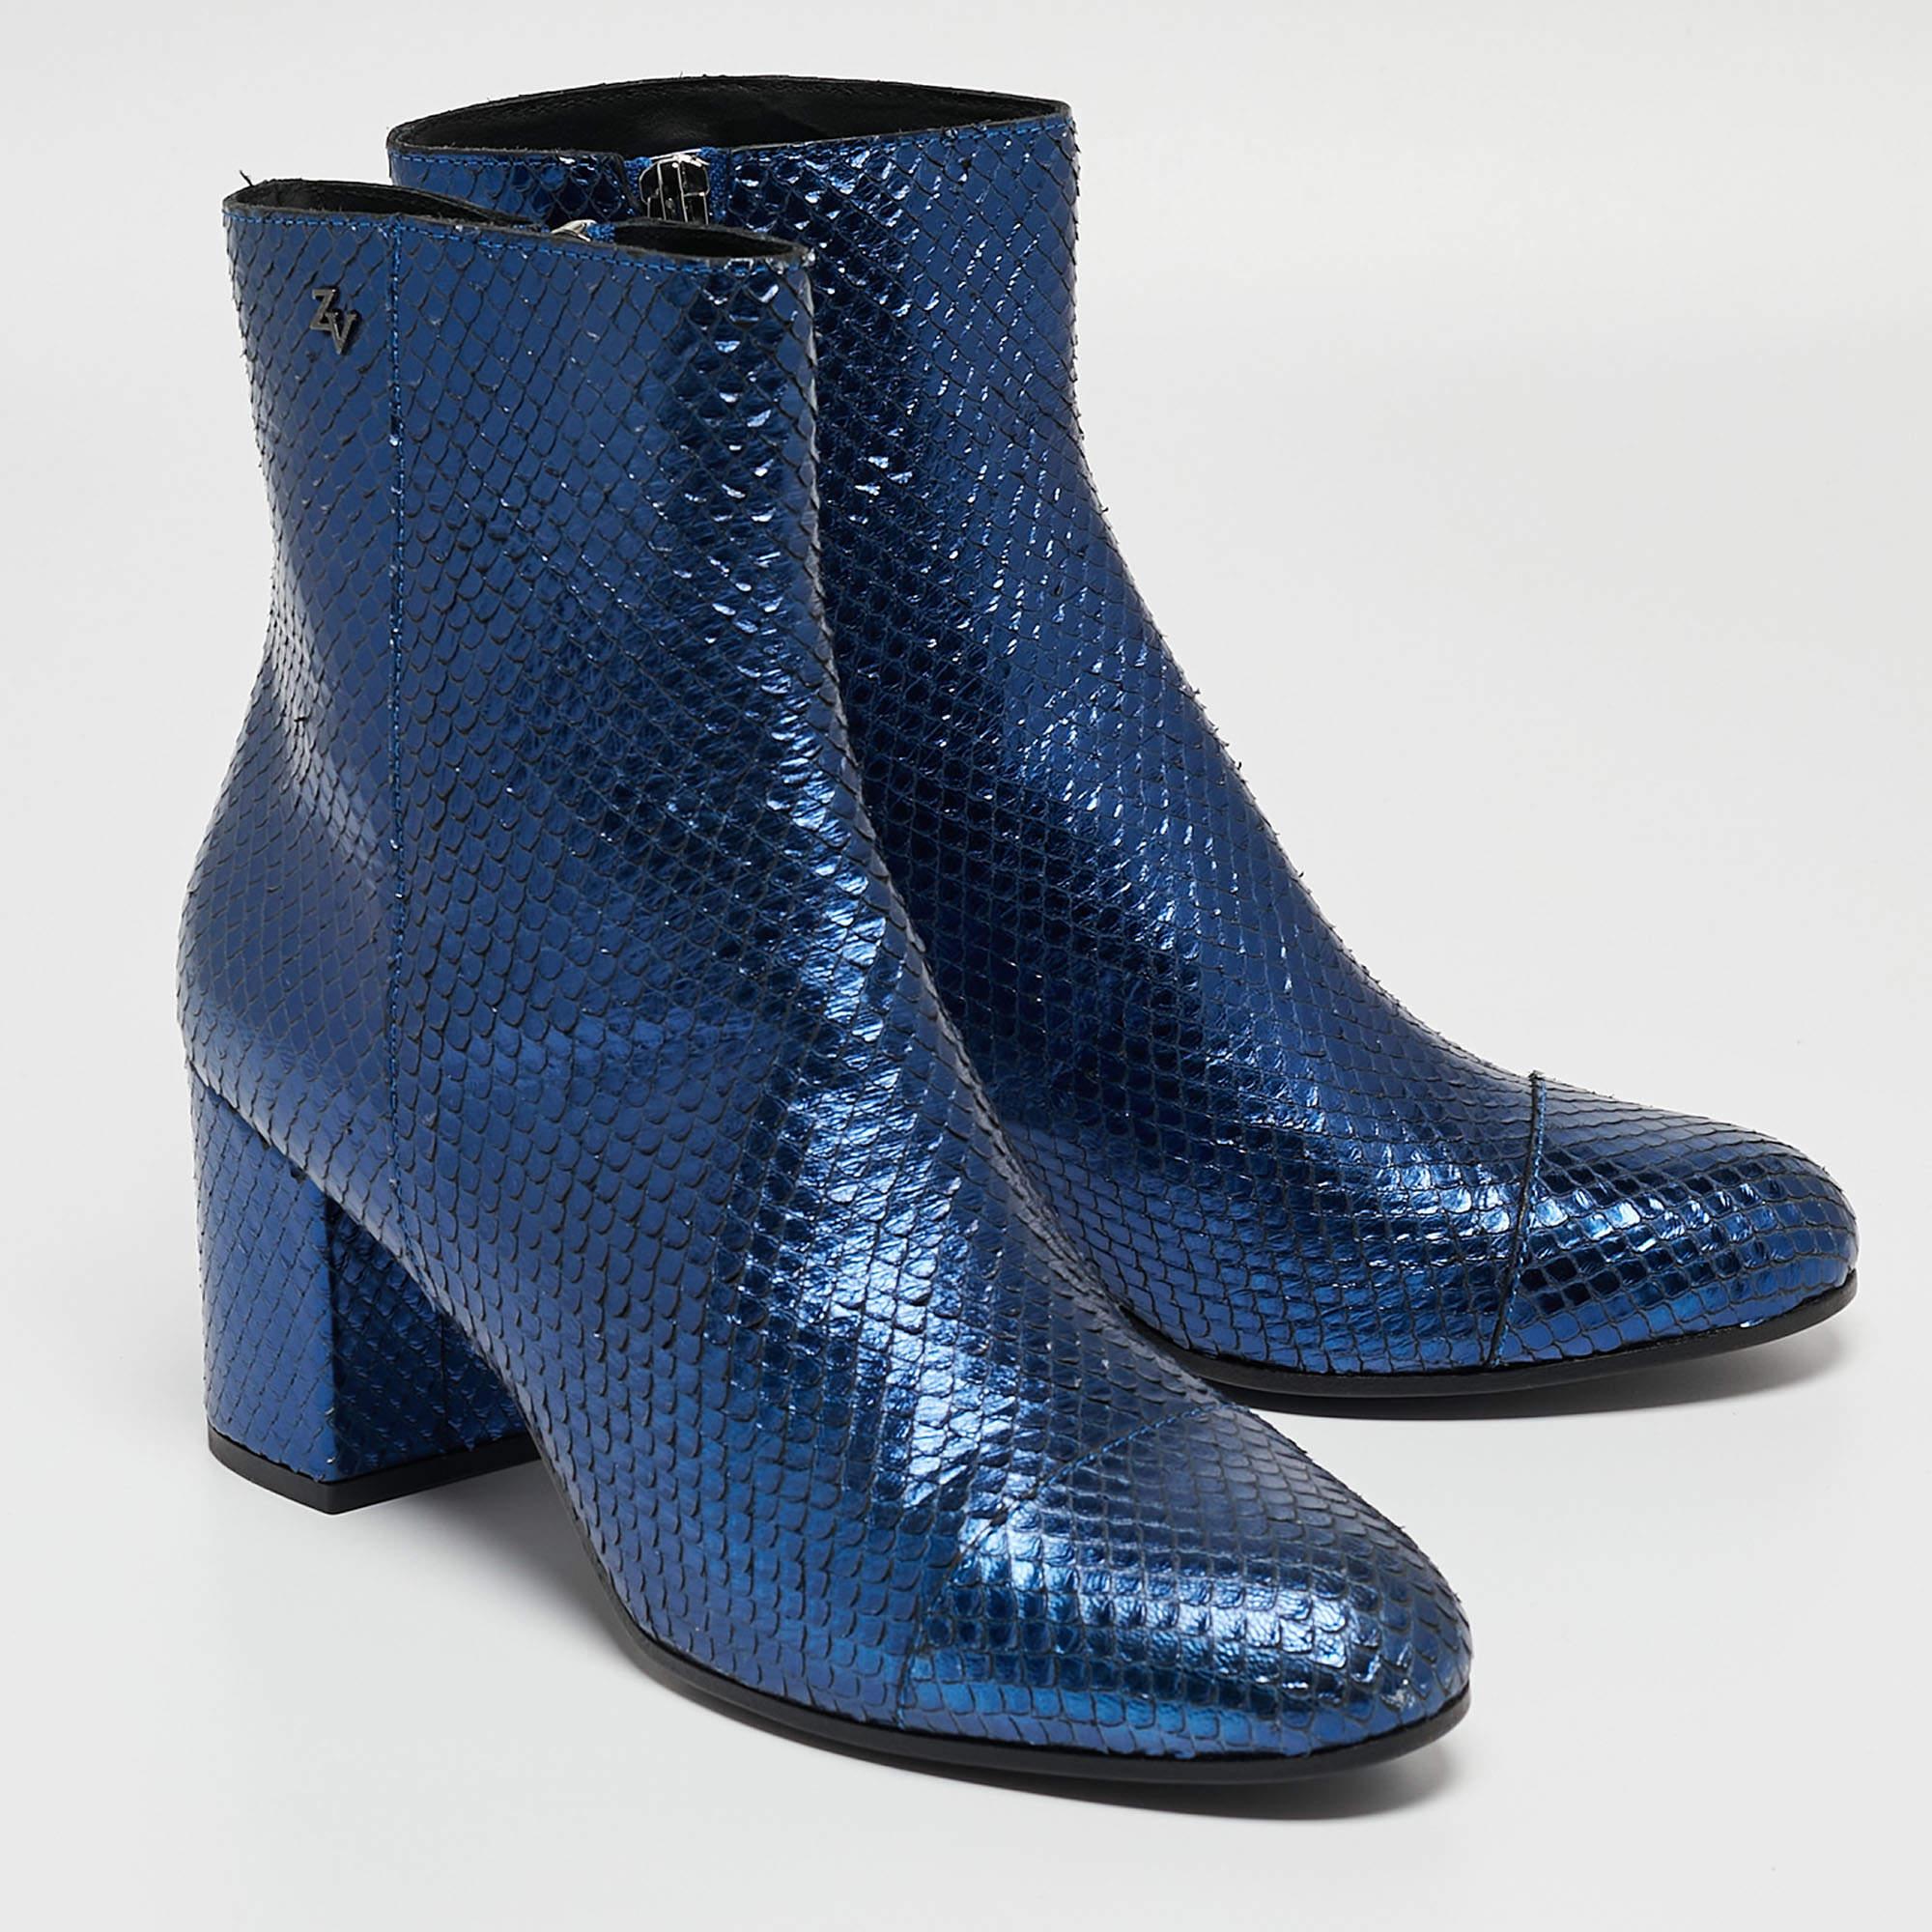 Women's Zadiq & Voltaire Blue Python Embossed Leather Block Heel Ankle Boots Size 40